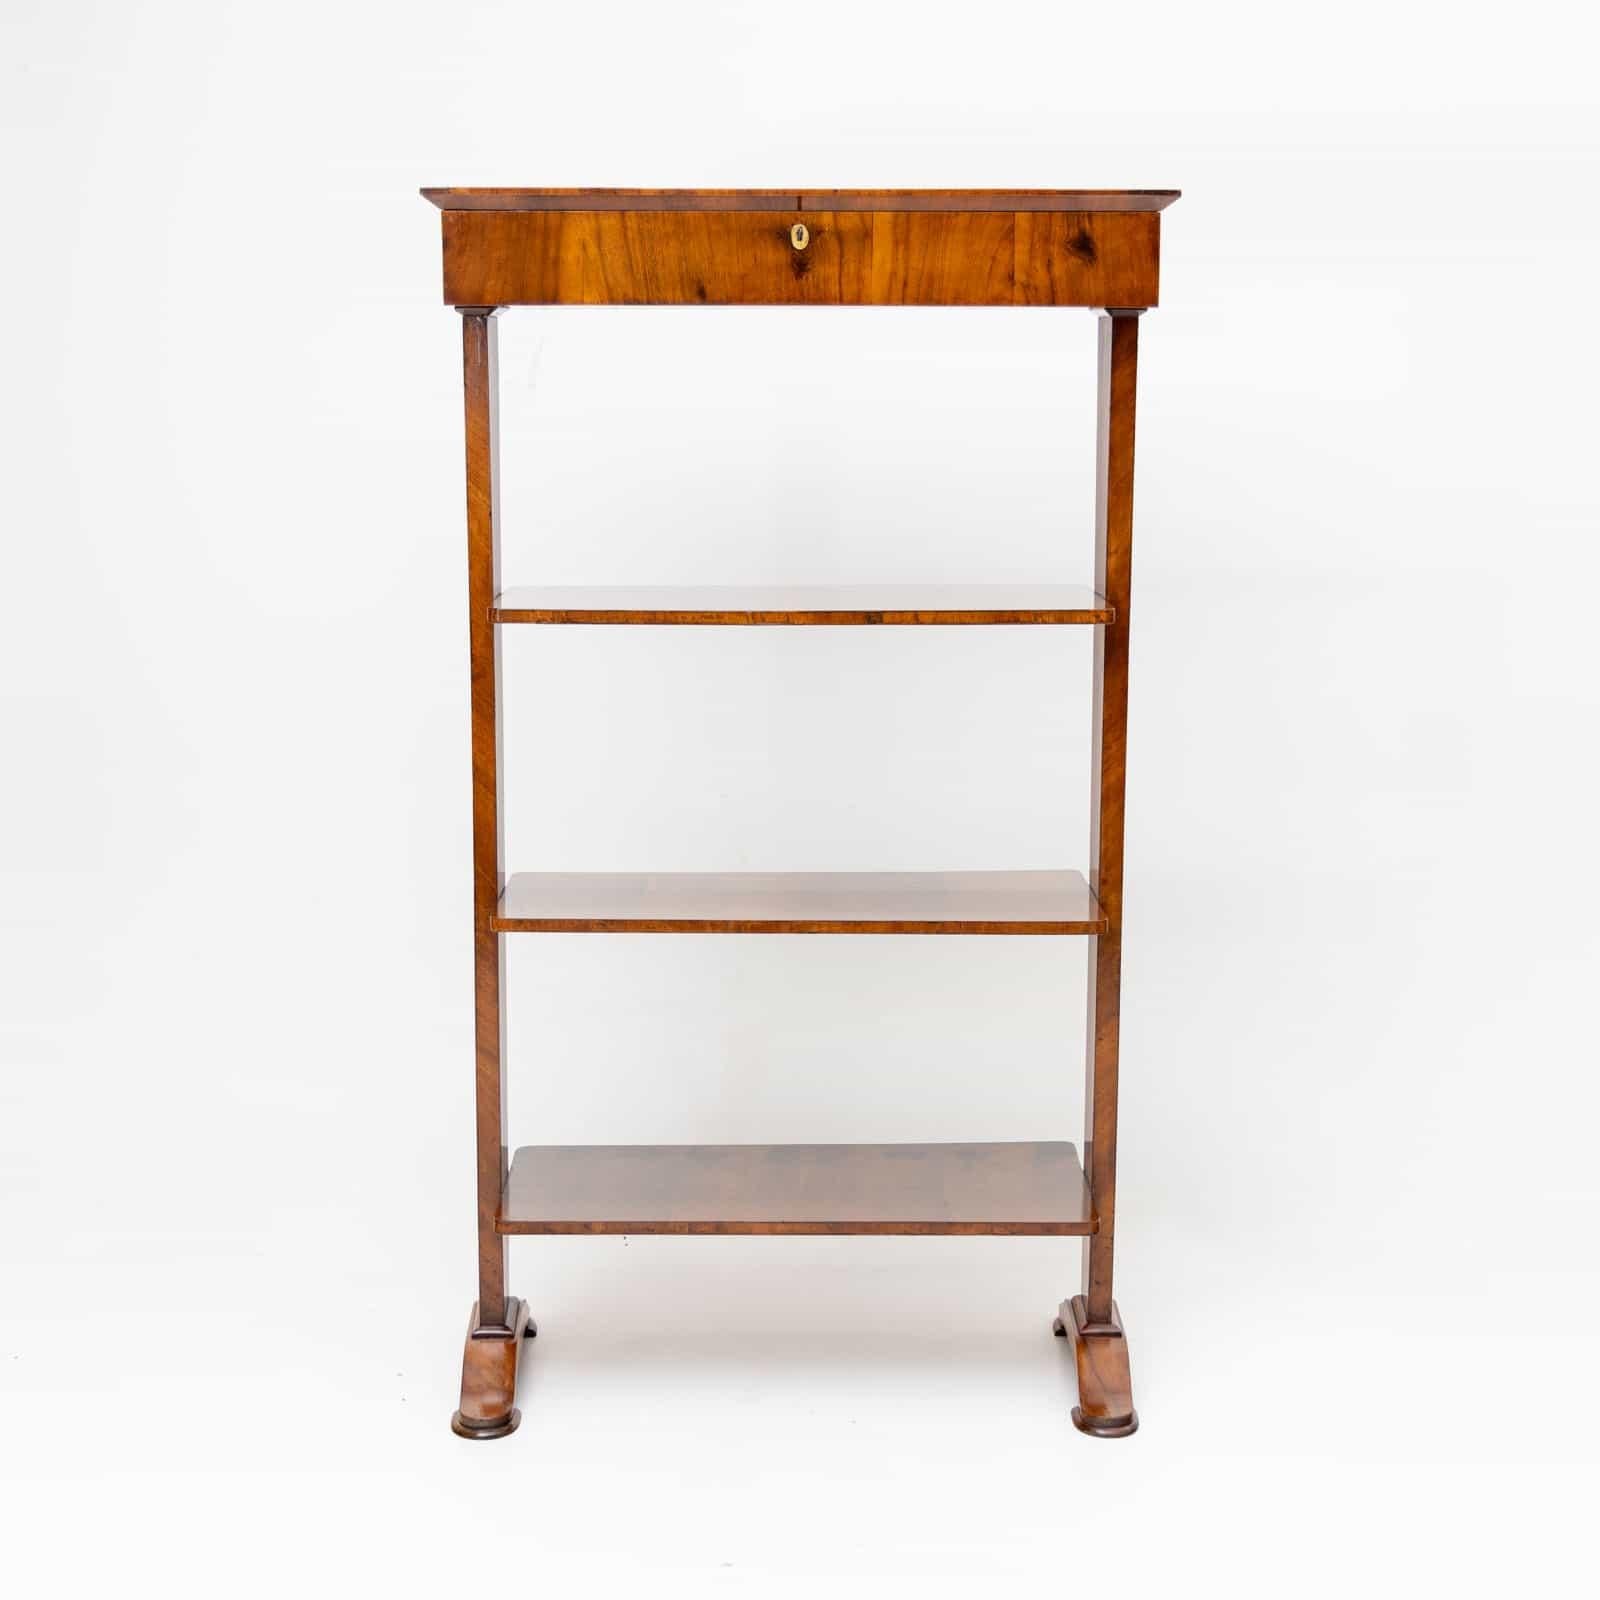 Biedermeier bookshelf with three shelves and a lockable hinged compartment. The étagère is veneered with walnut and stands on slightly curved feet.